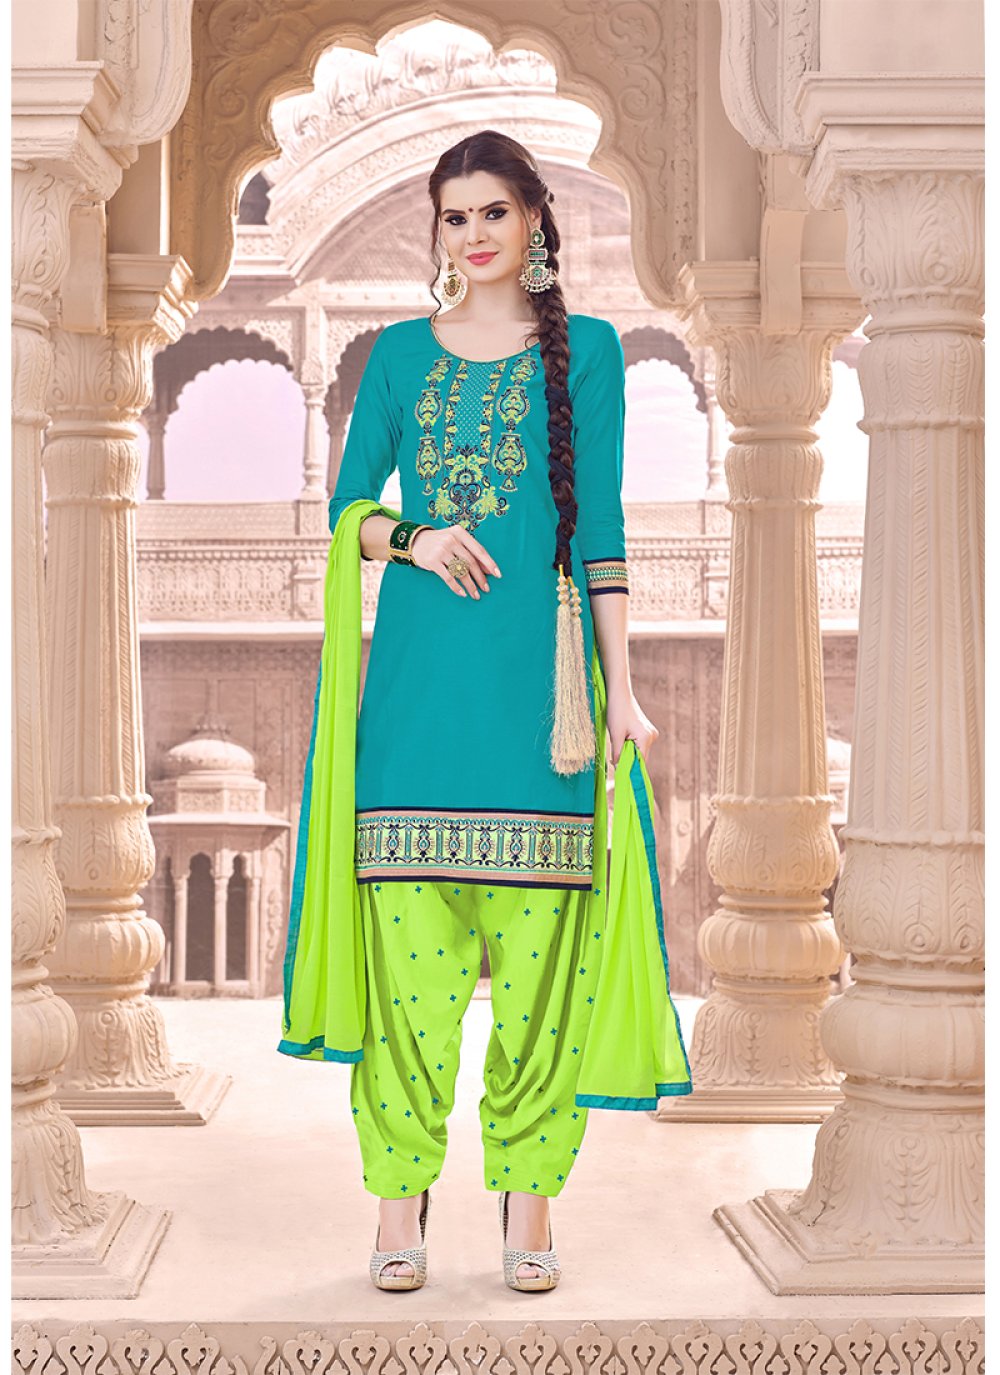 3A DARK SKY BLUE COLORED SILK STYLE PARTYWEAR EMBROIDERED PUNJABI SUIT in  Amritsar at best price by Lxora - Justdial